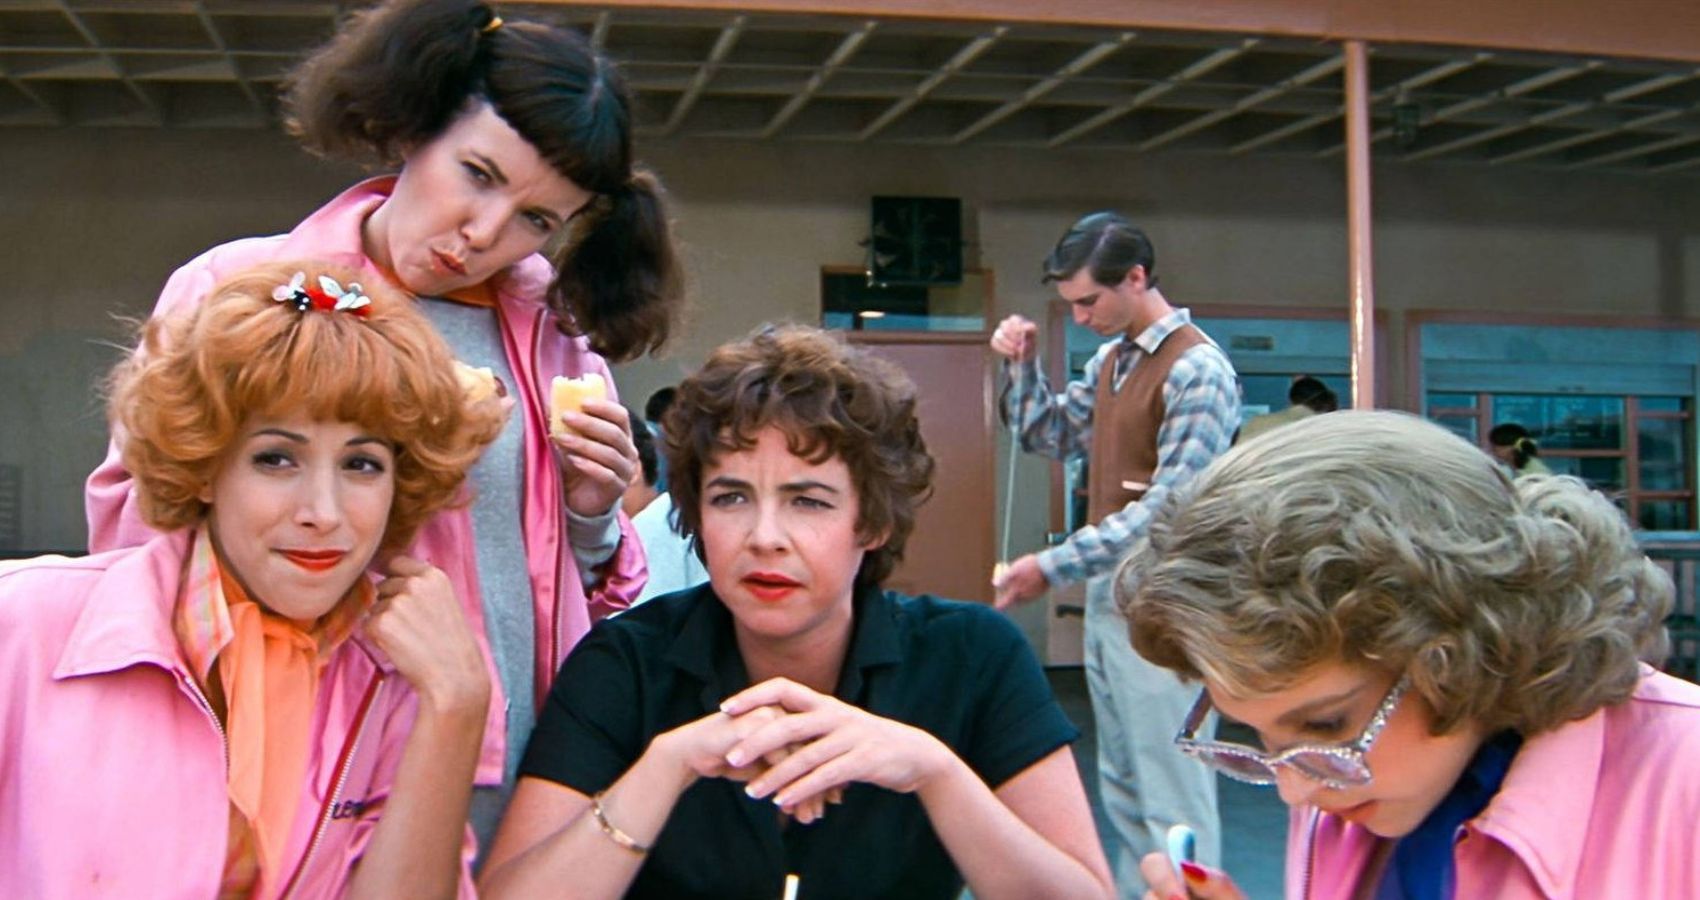 The 'Pink Ladies' Cast Reveals What It's Like to Wear Those Iconic